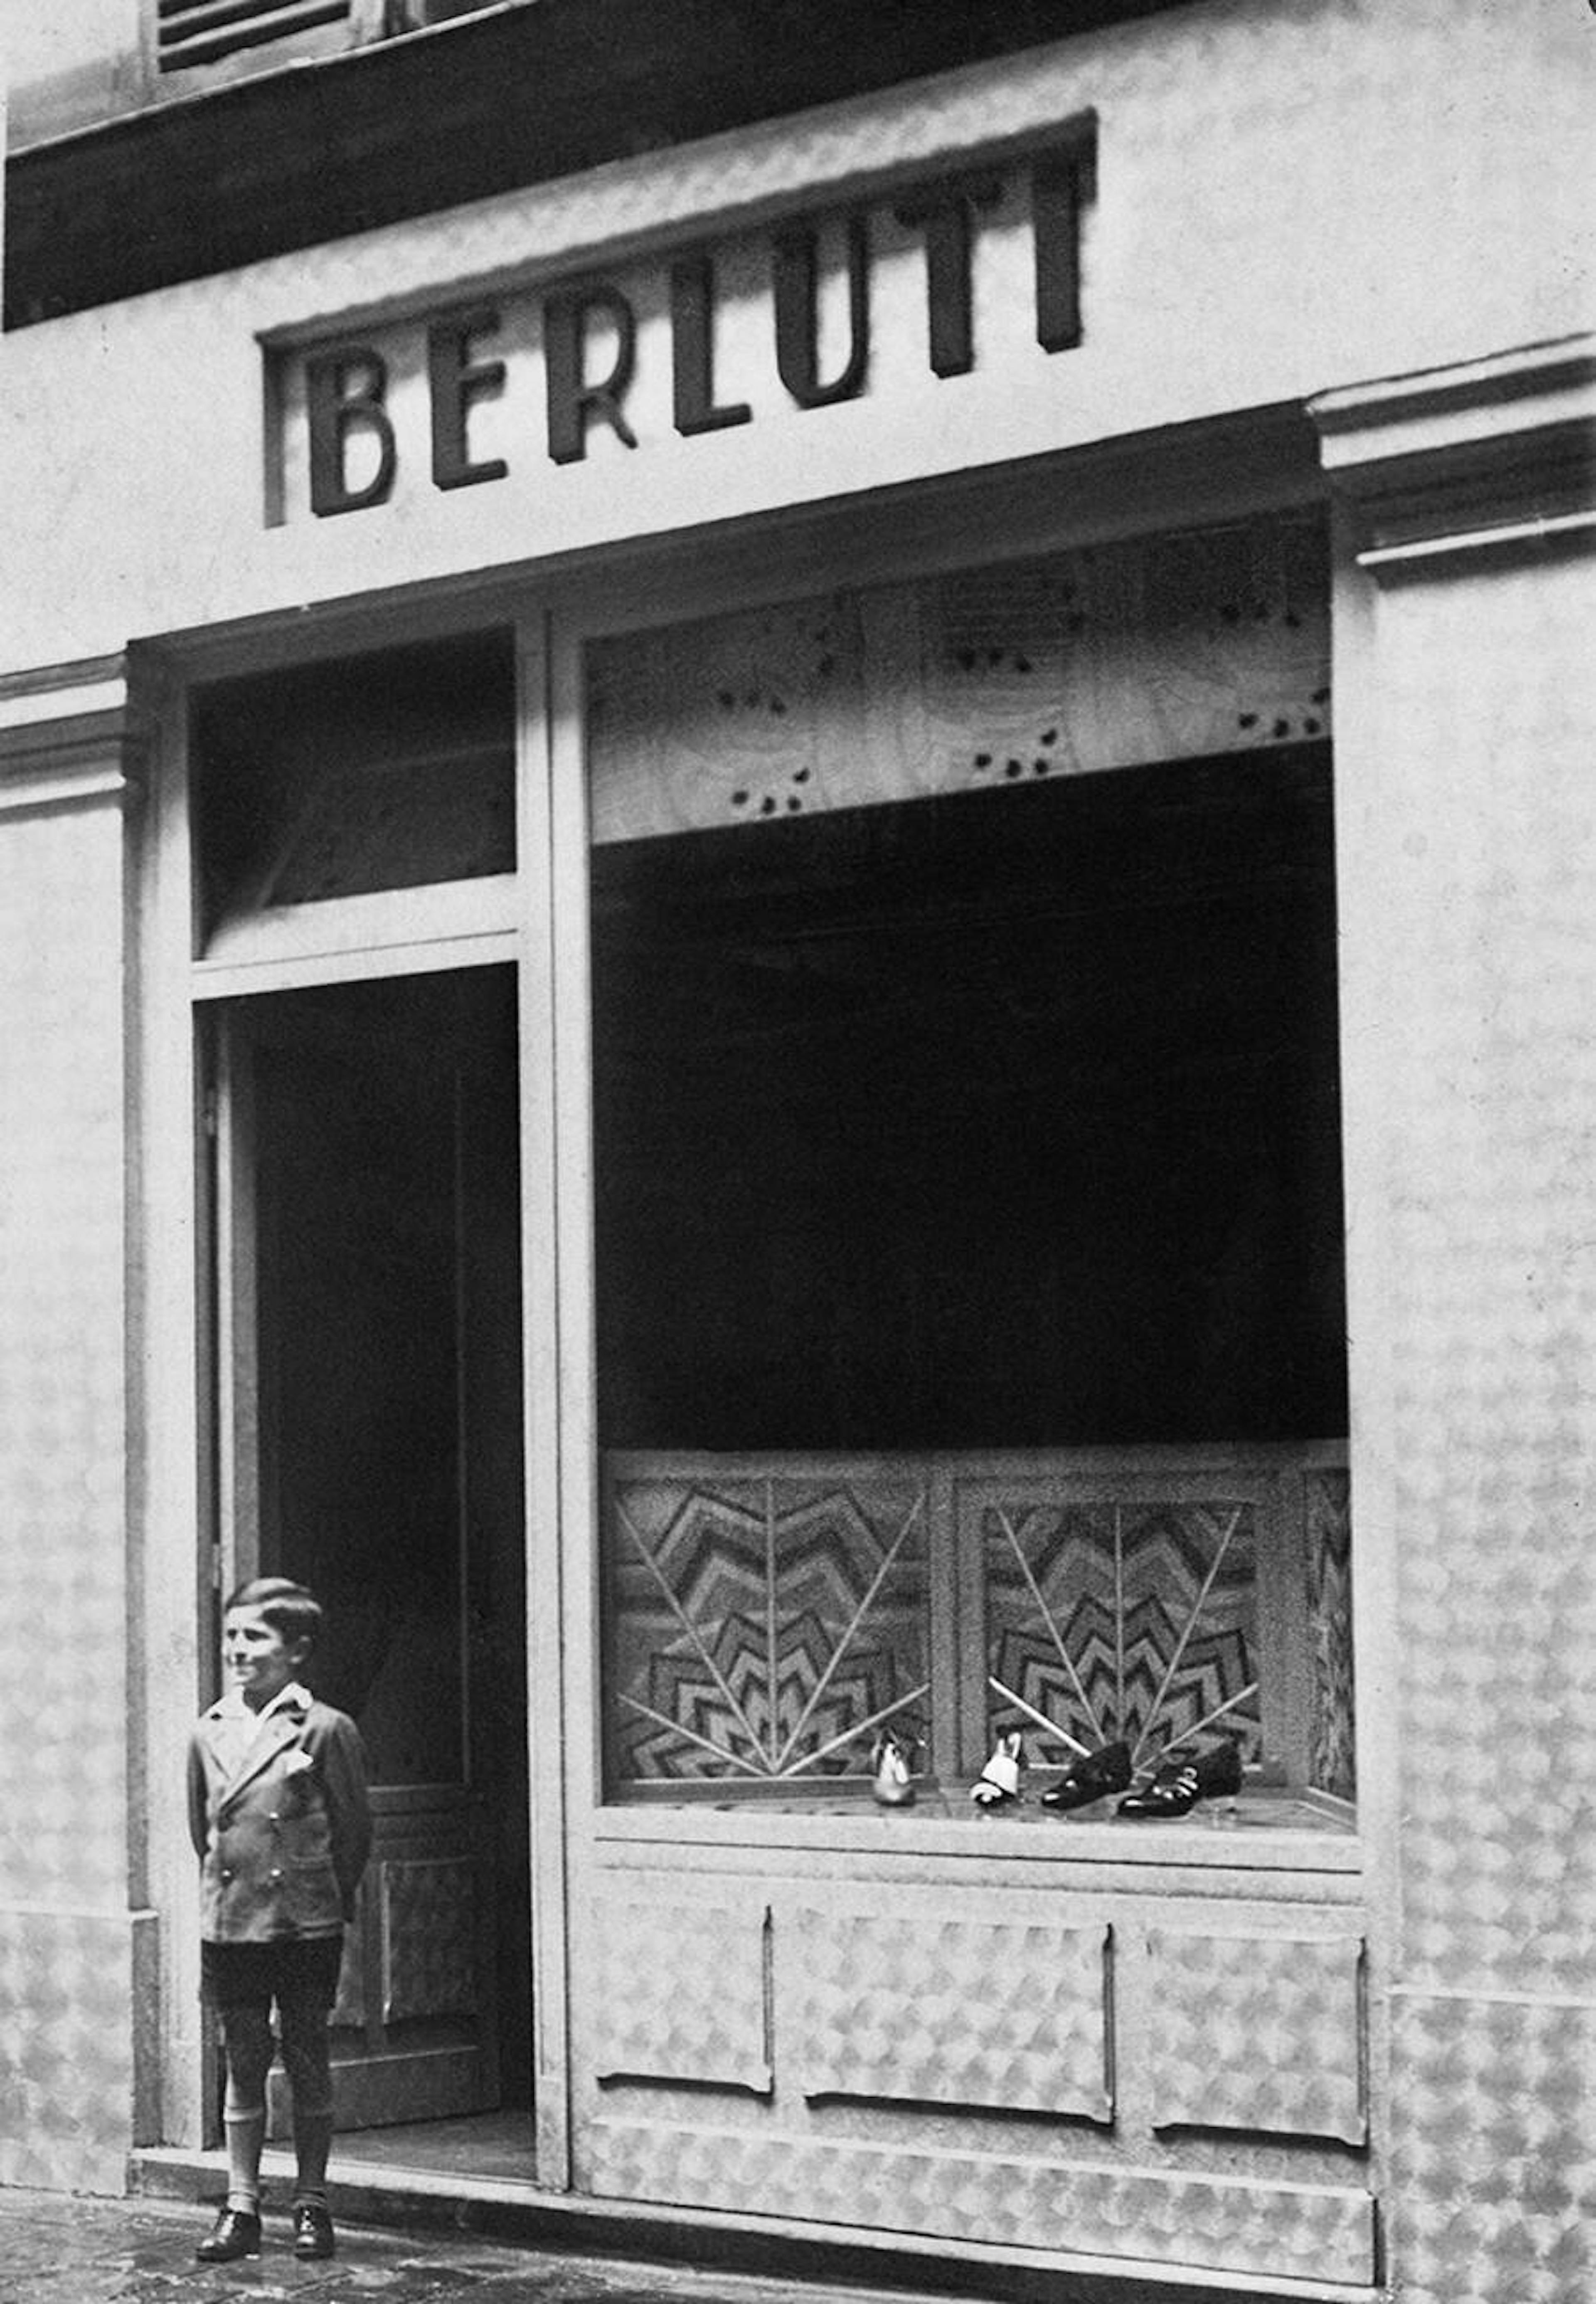 Talbinio Berluti in front of the first Berluti boutique, rue du Mont-Thabor. 